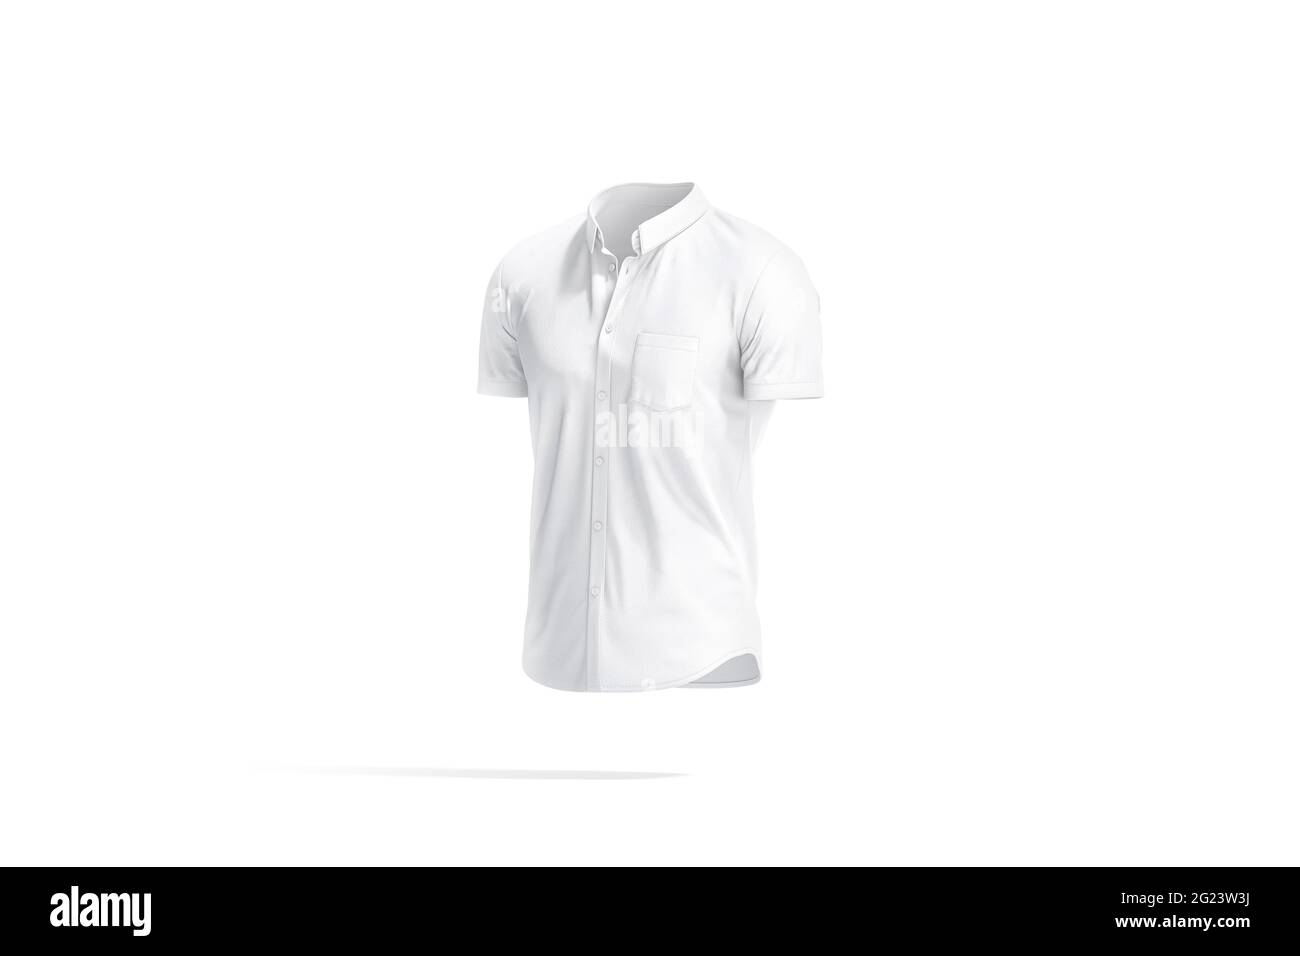 Blank white short sleeve button down shirt mockup, side view Stock Photo